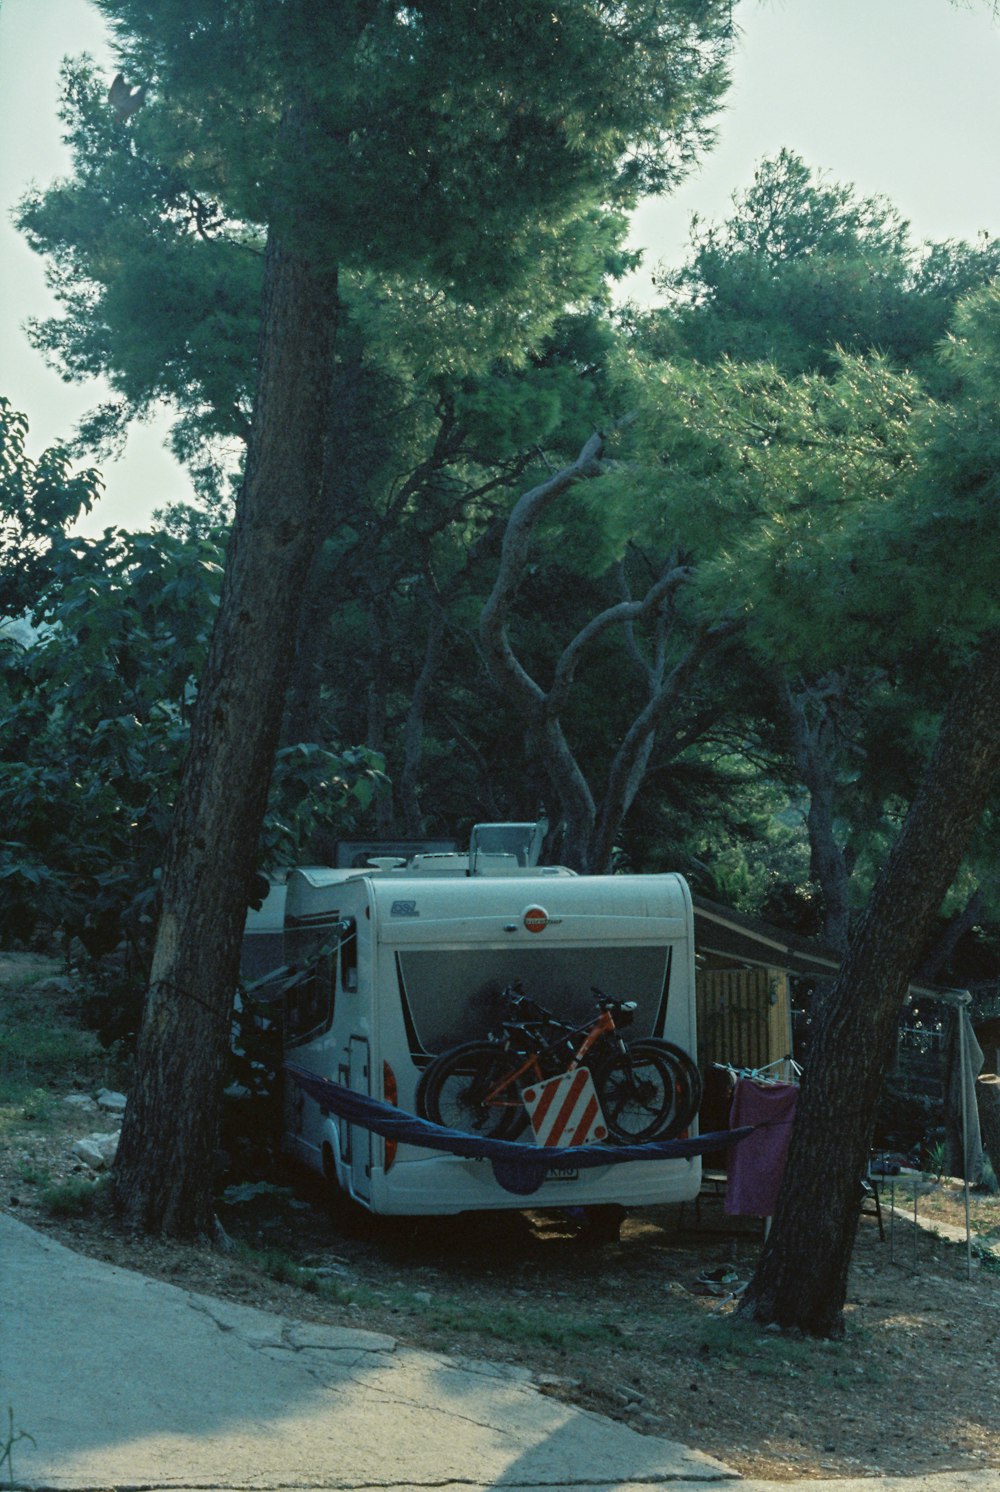 a camper parked in the shade of a tree